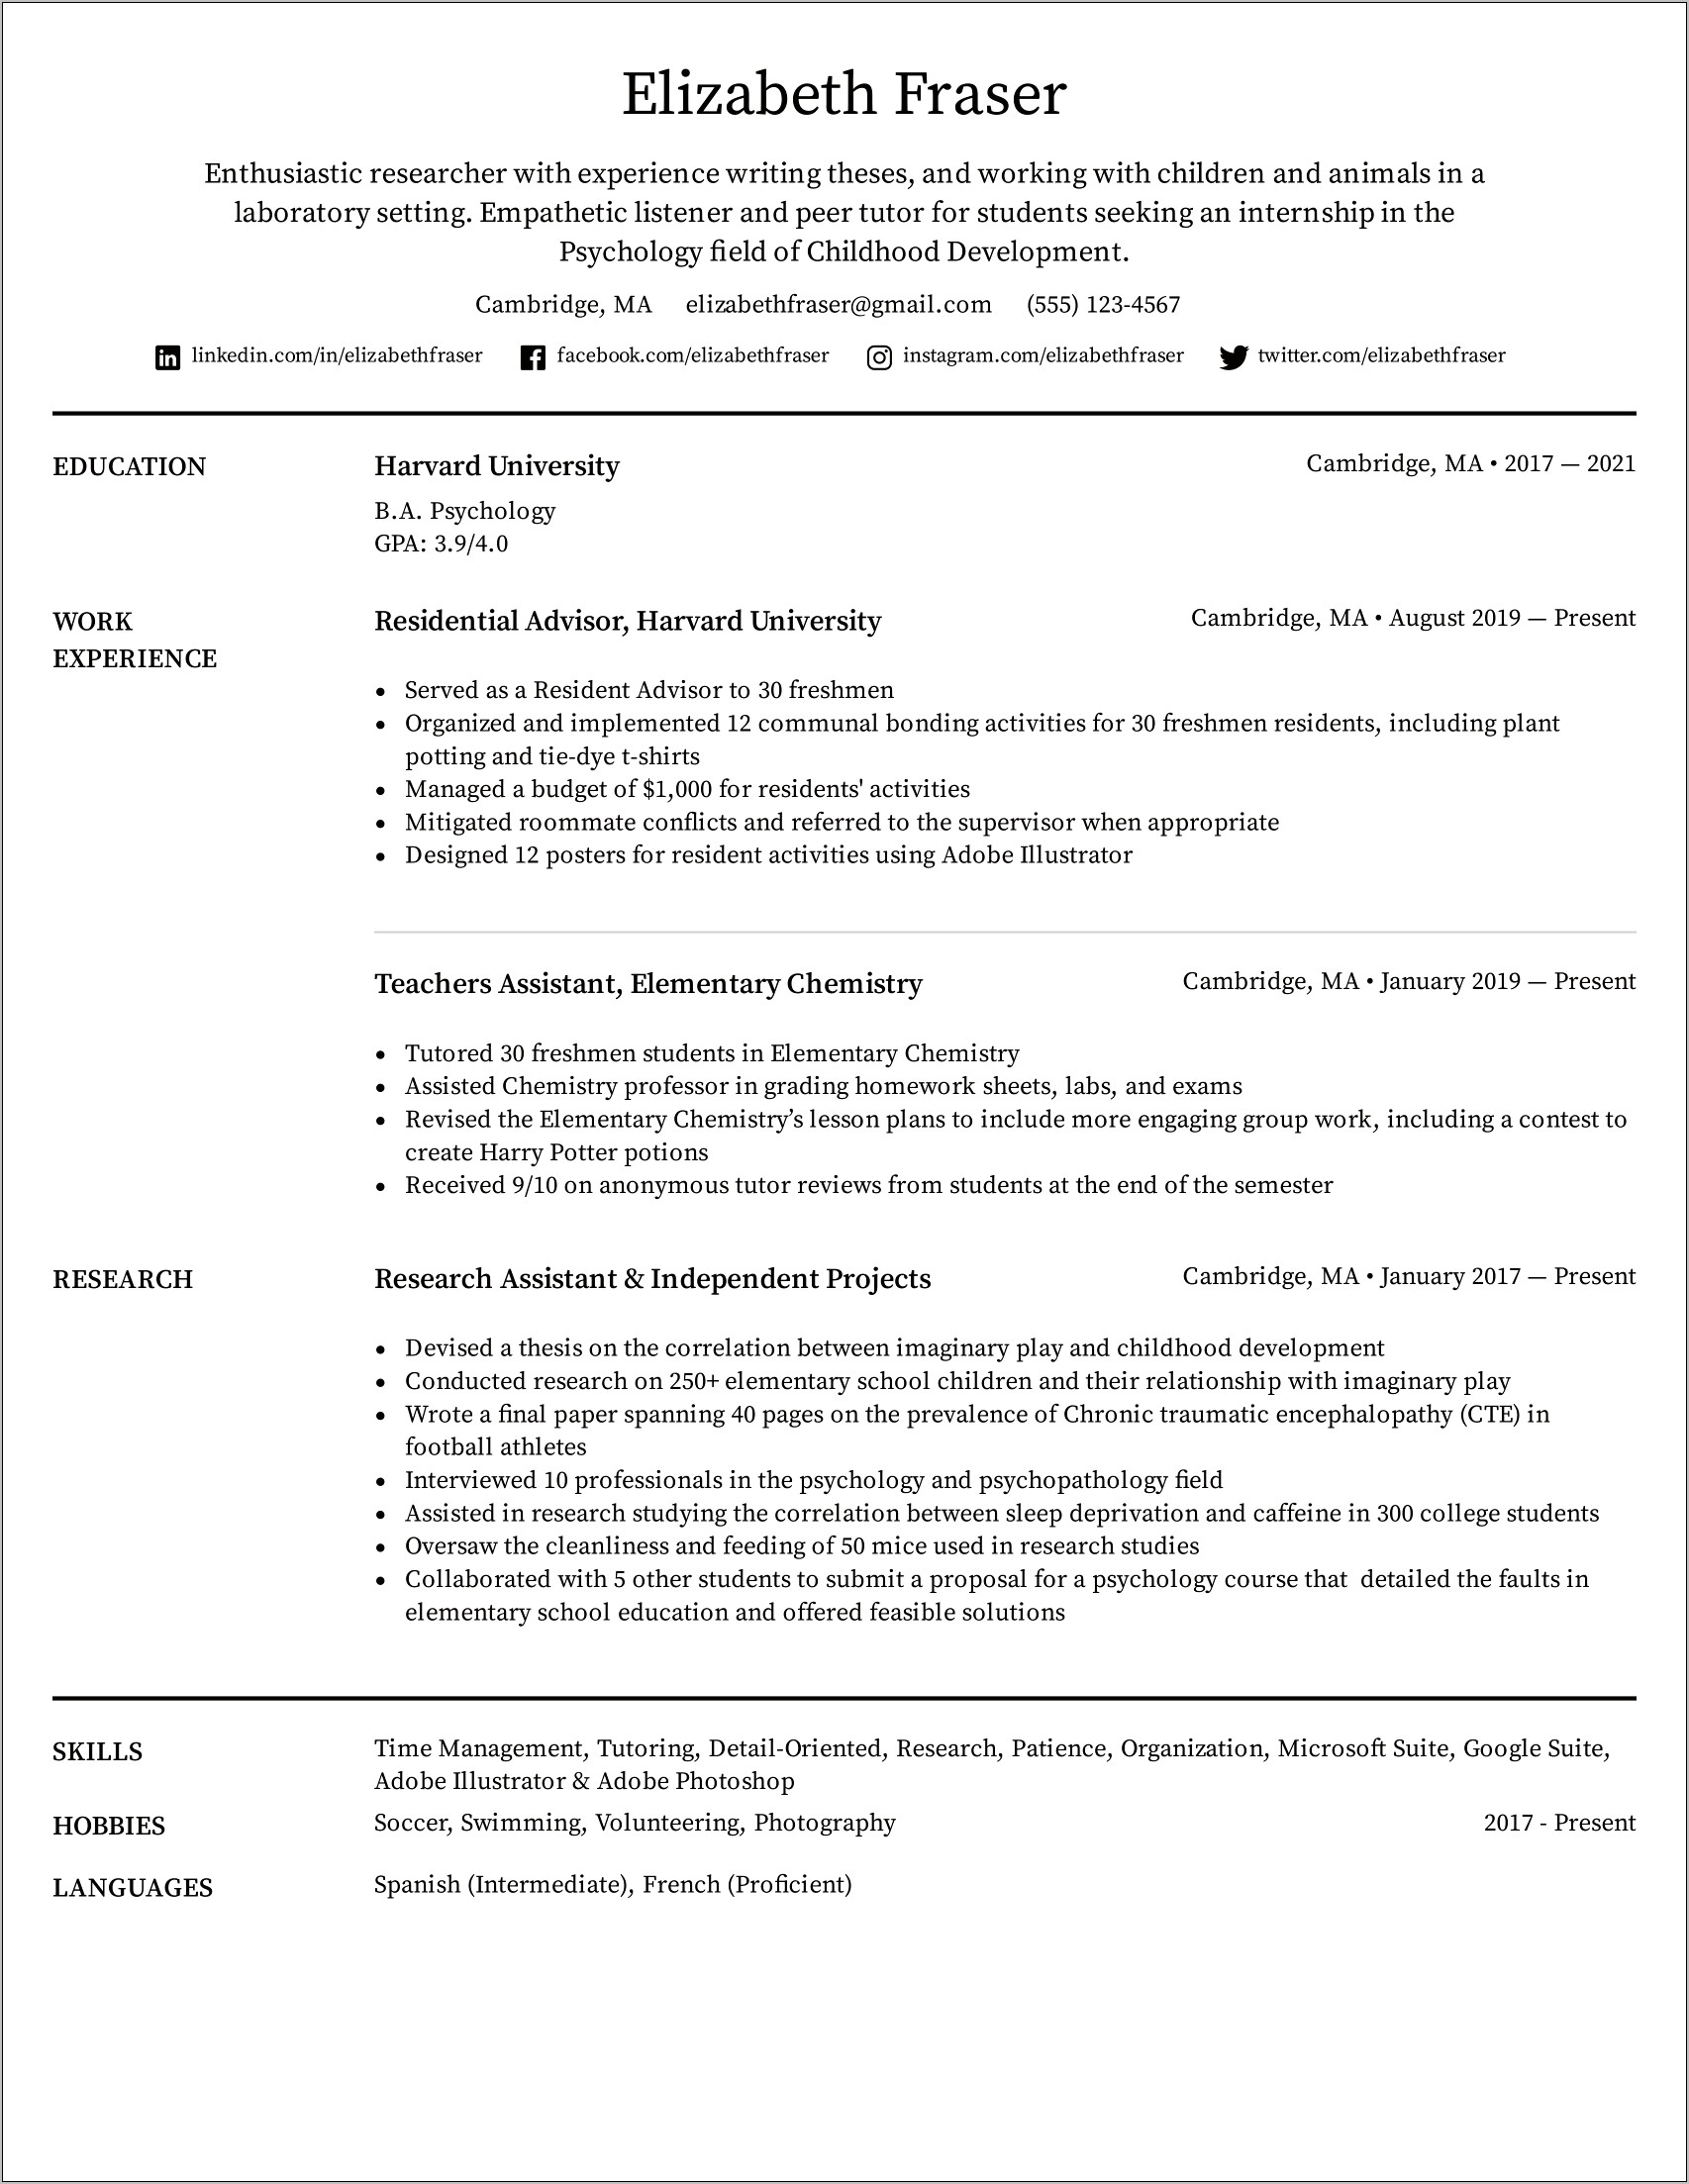 Resume Examples For Students With Little Work Experience